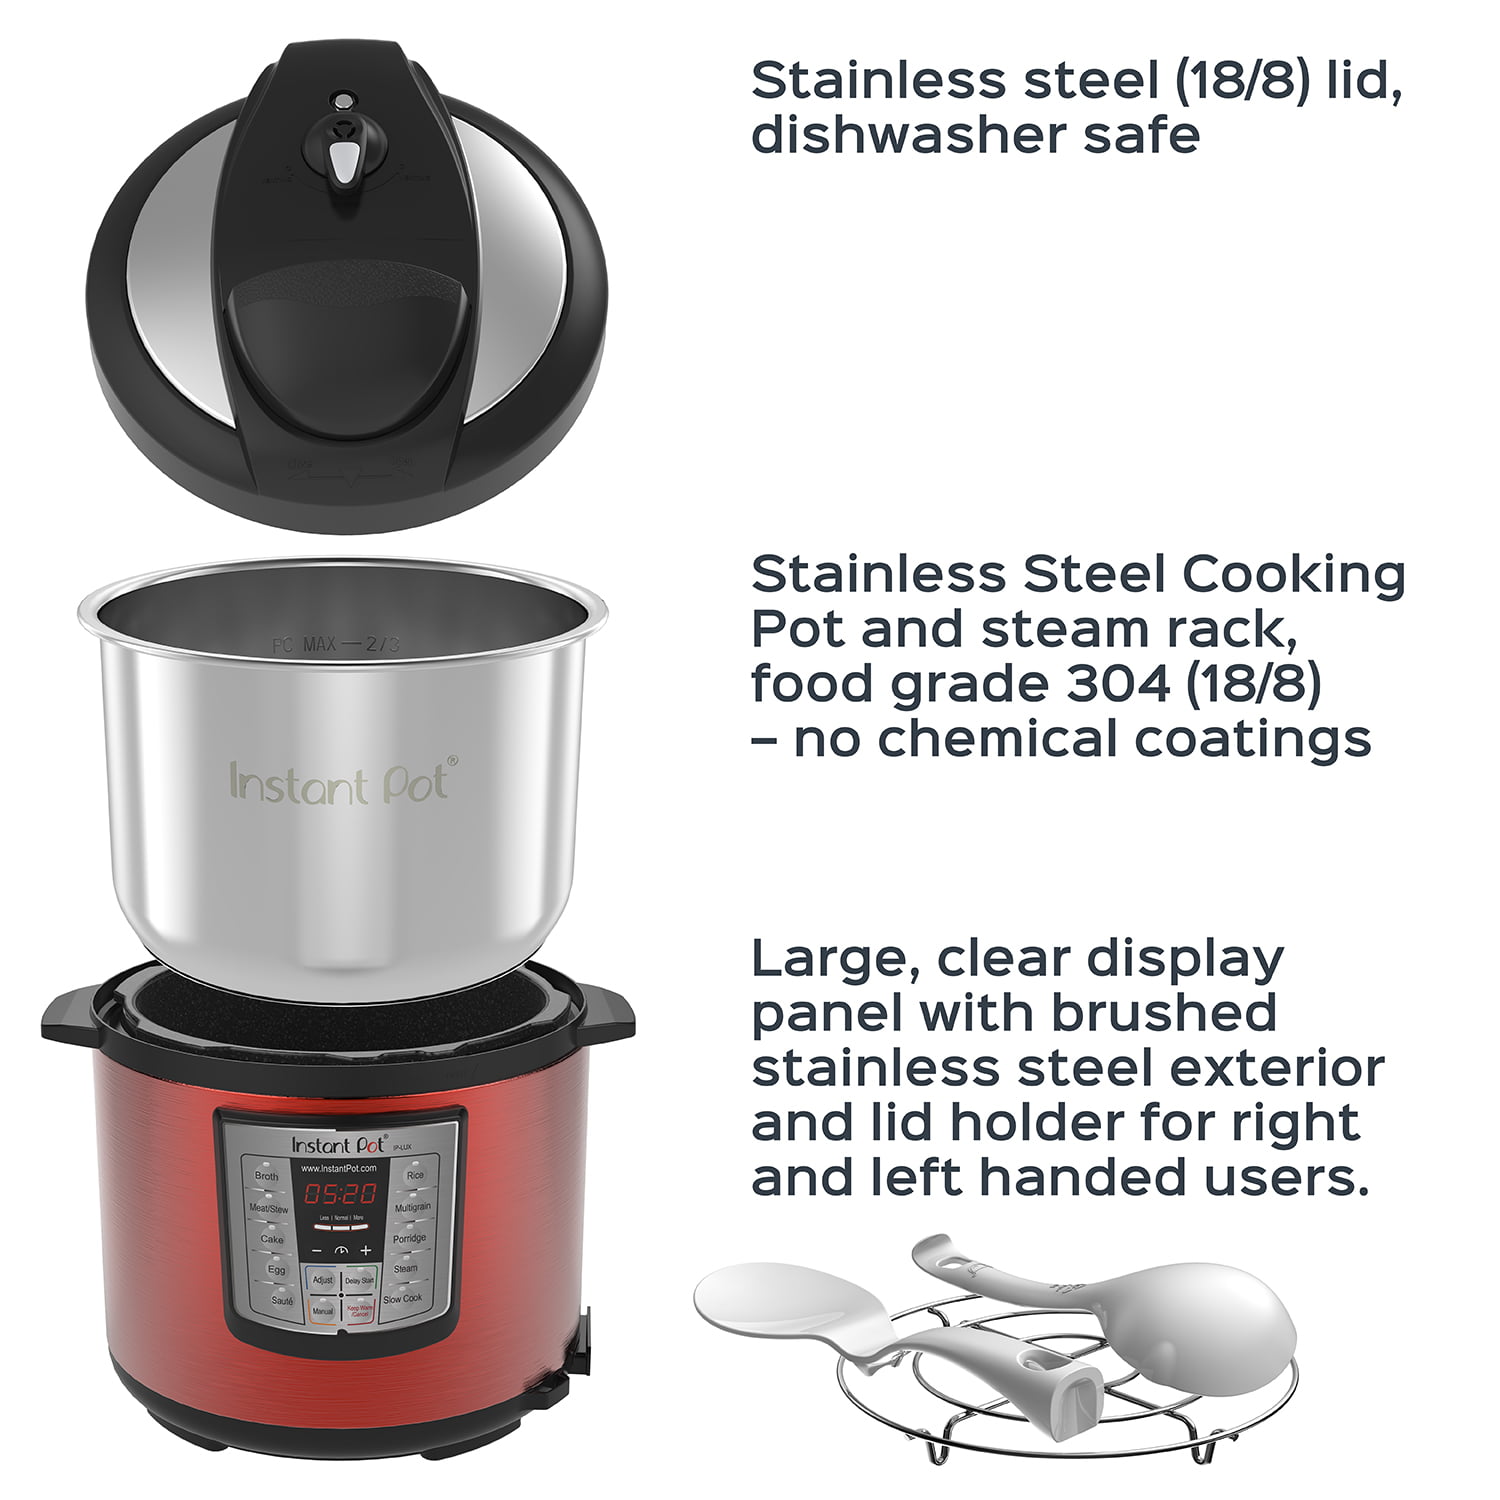 Instant Pot Dimensions - Paint The Kitchen Red